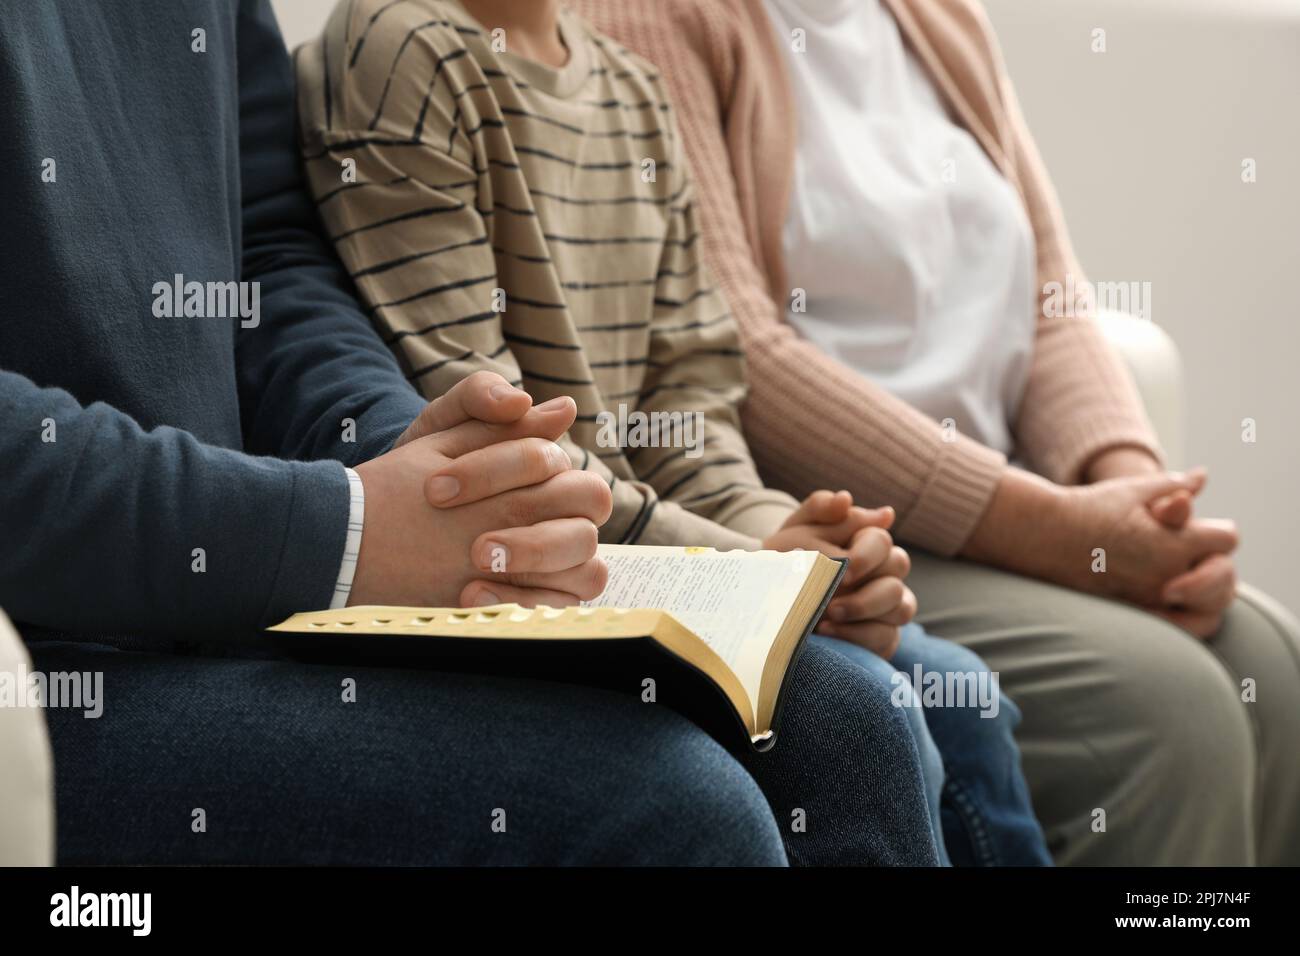 Boy and his godparents praying together indoors, closeup Stock Photo